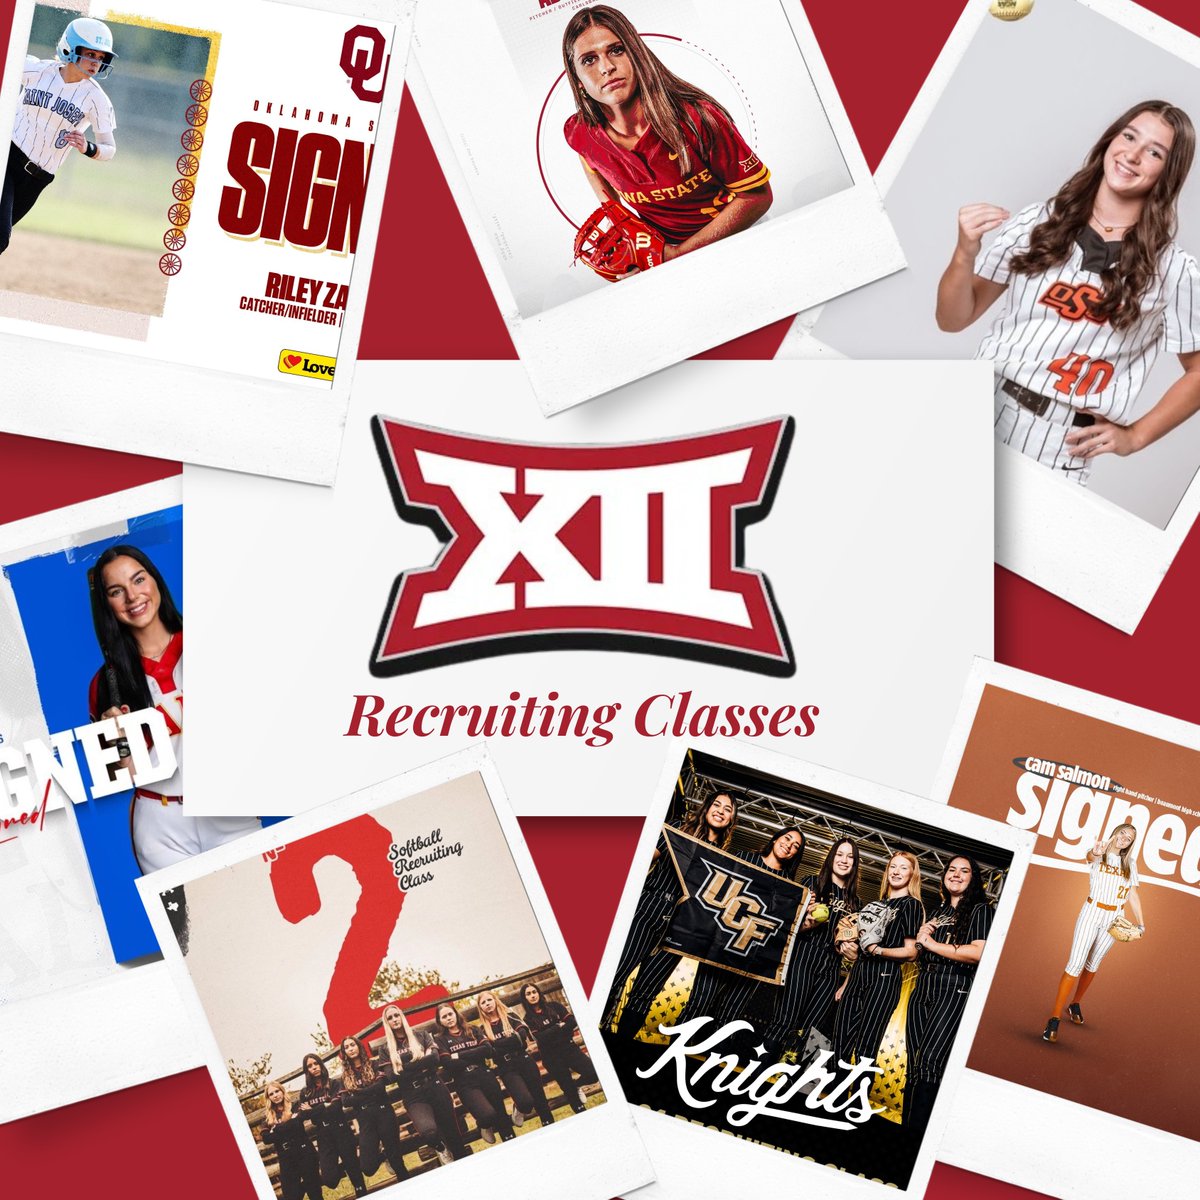 The Big 12 secured the top two recruiting classes in the country and featured seven teams in the top 60 nationally. shorturl.at/fzMU9